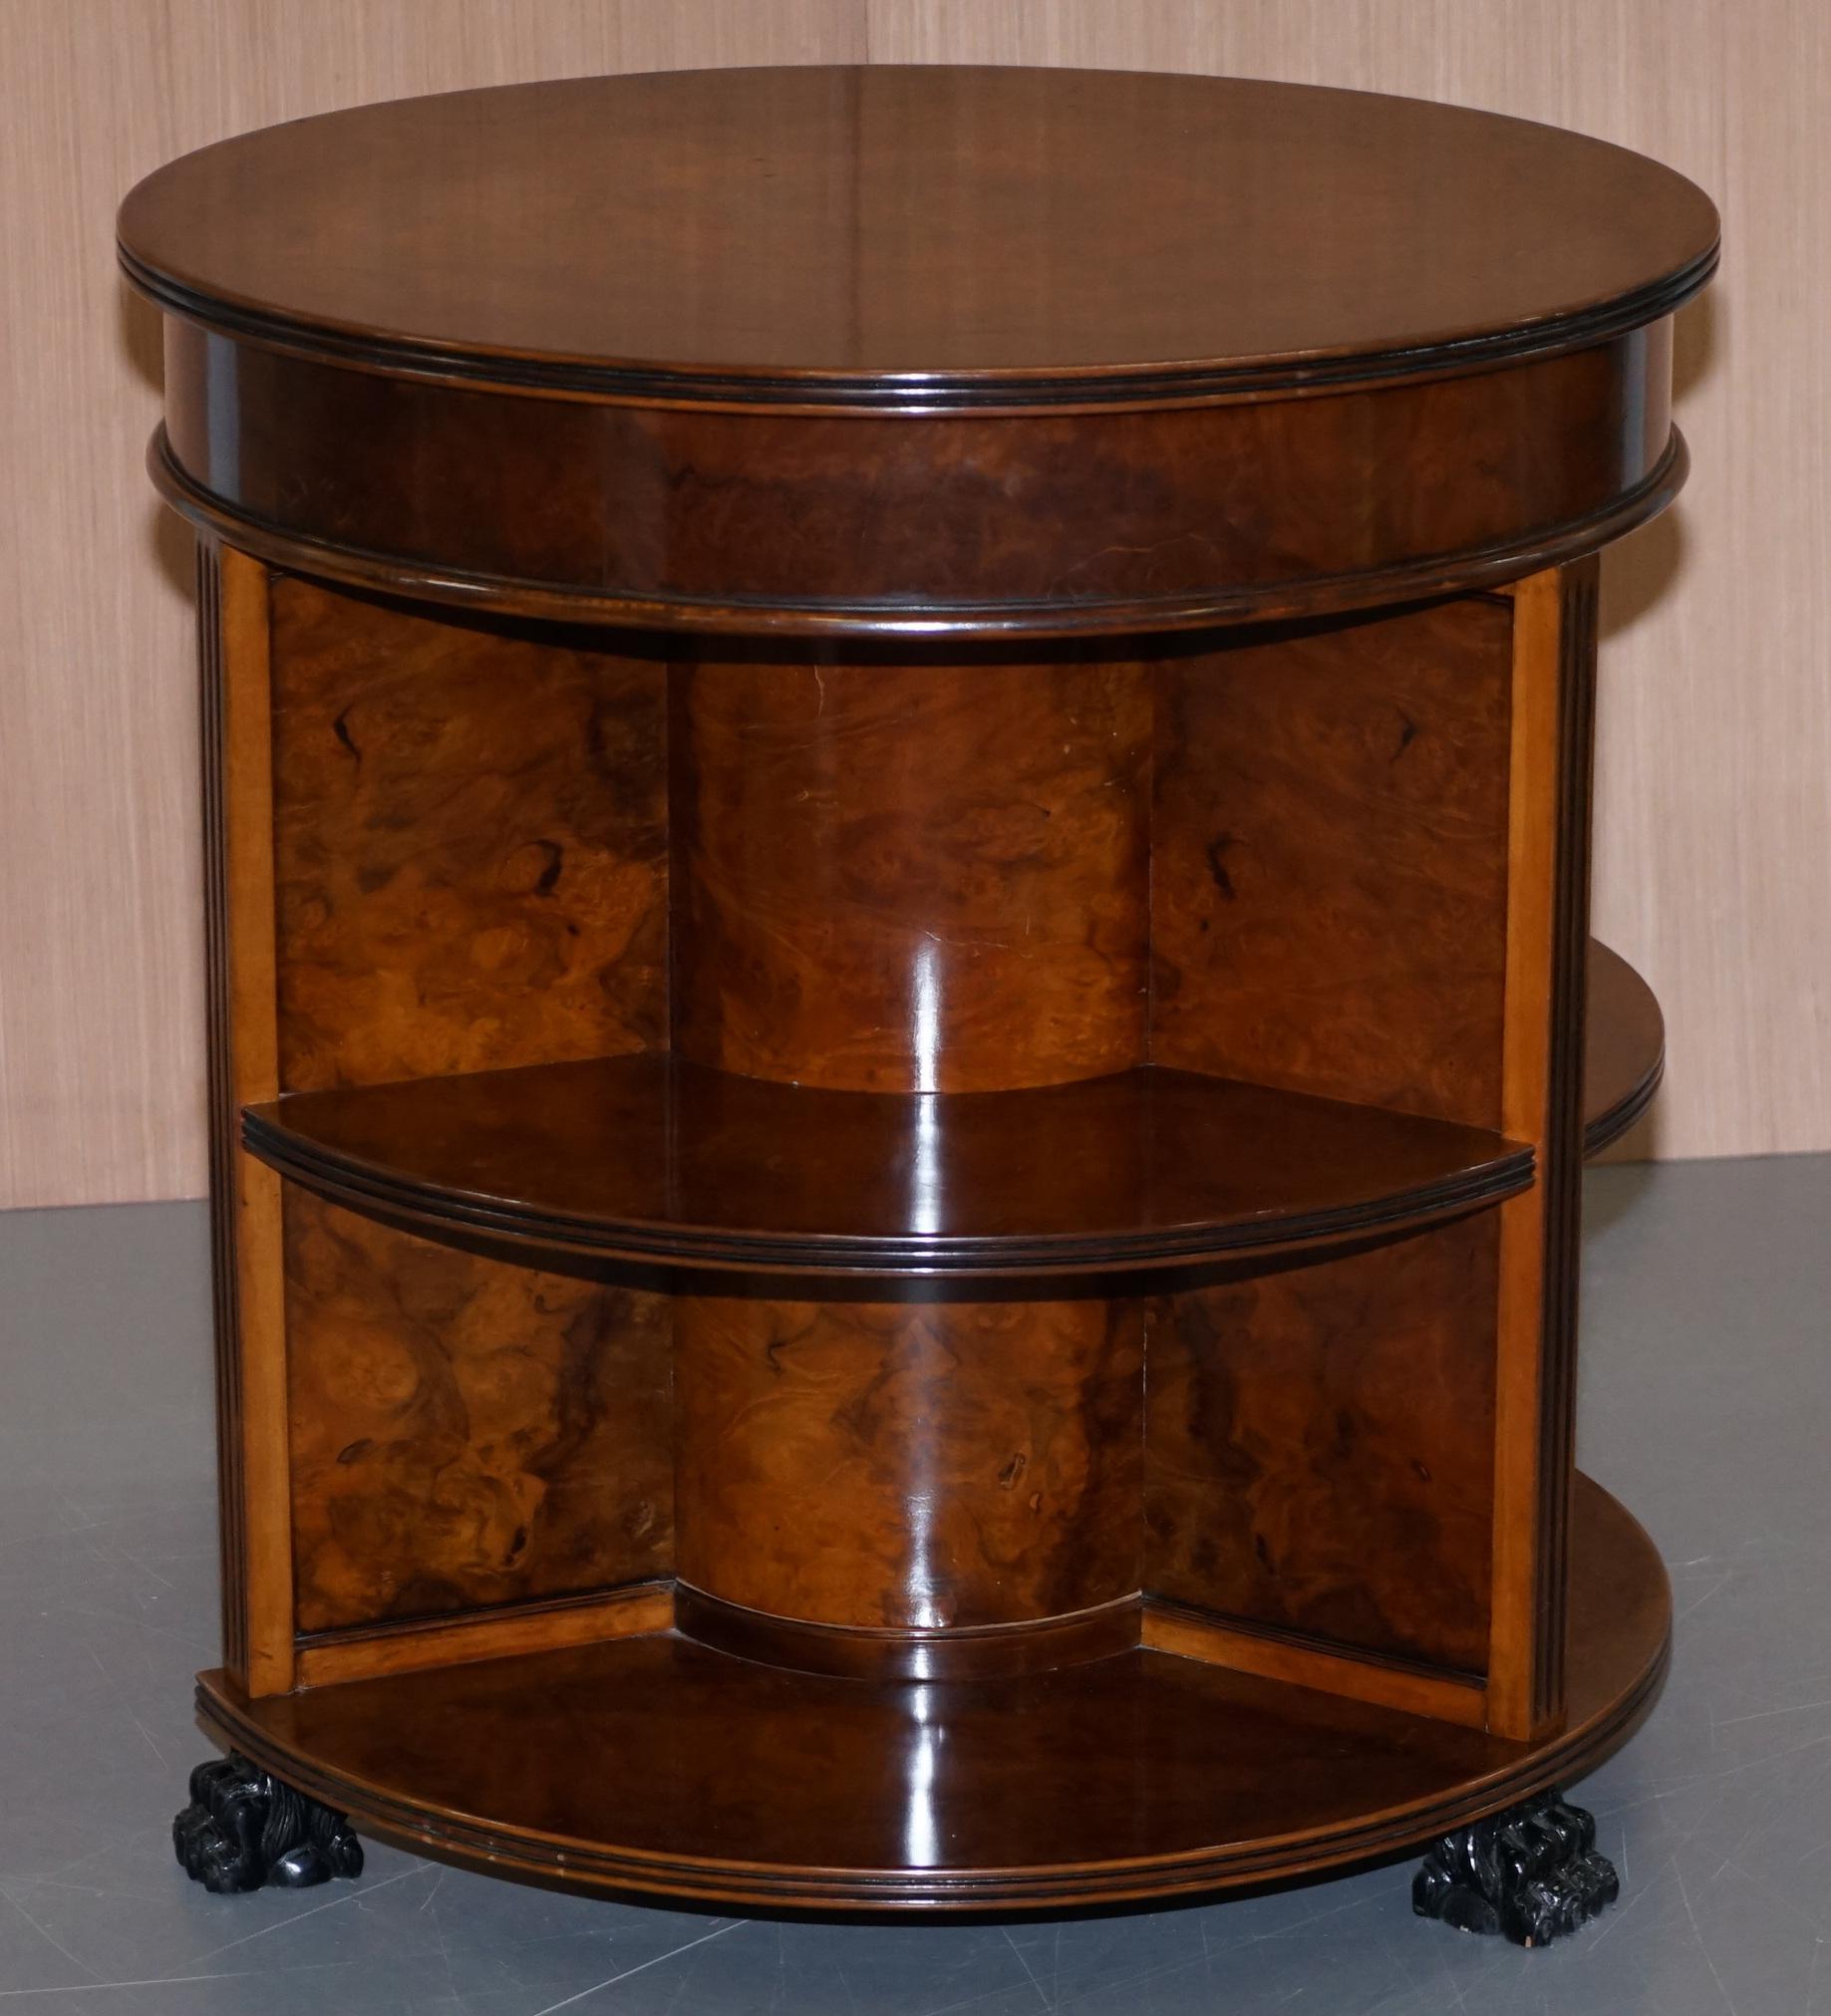 Hand-Crafted Stunning Burl Walnut Round Bookcase Table with Drawer Lion Hairy Paw Feet Burr